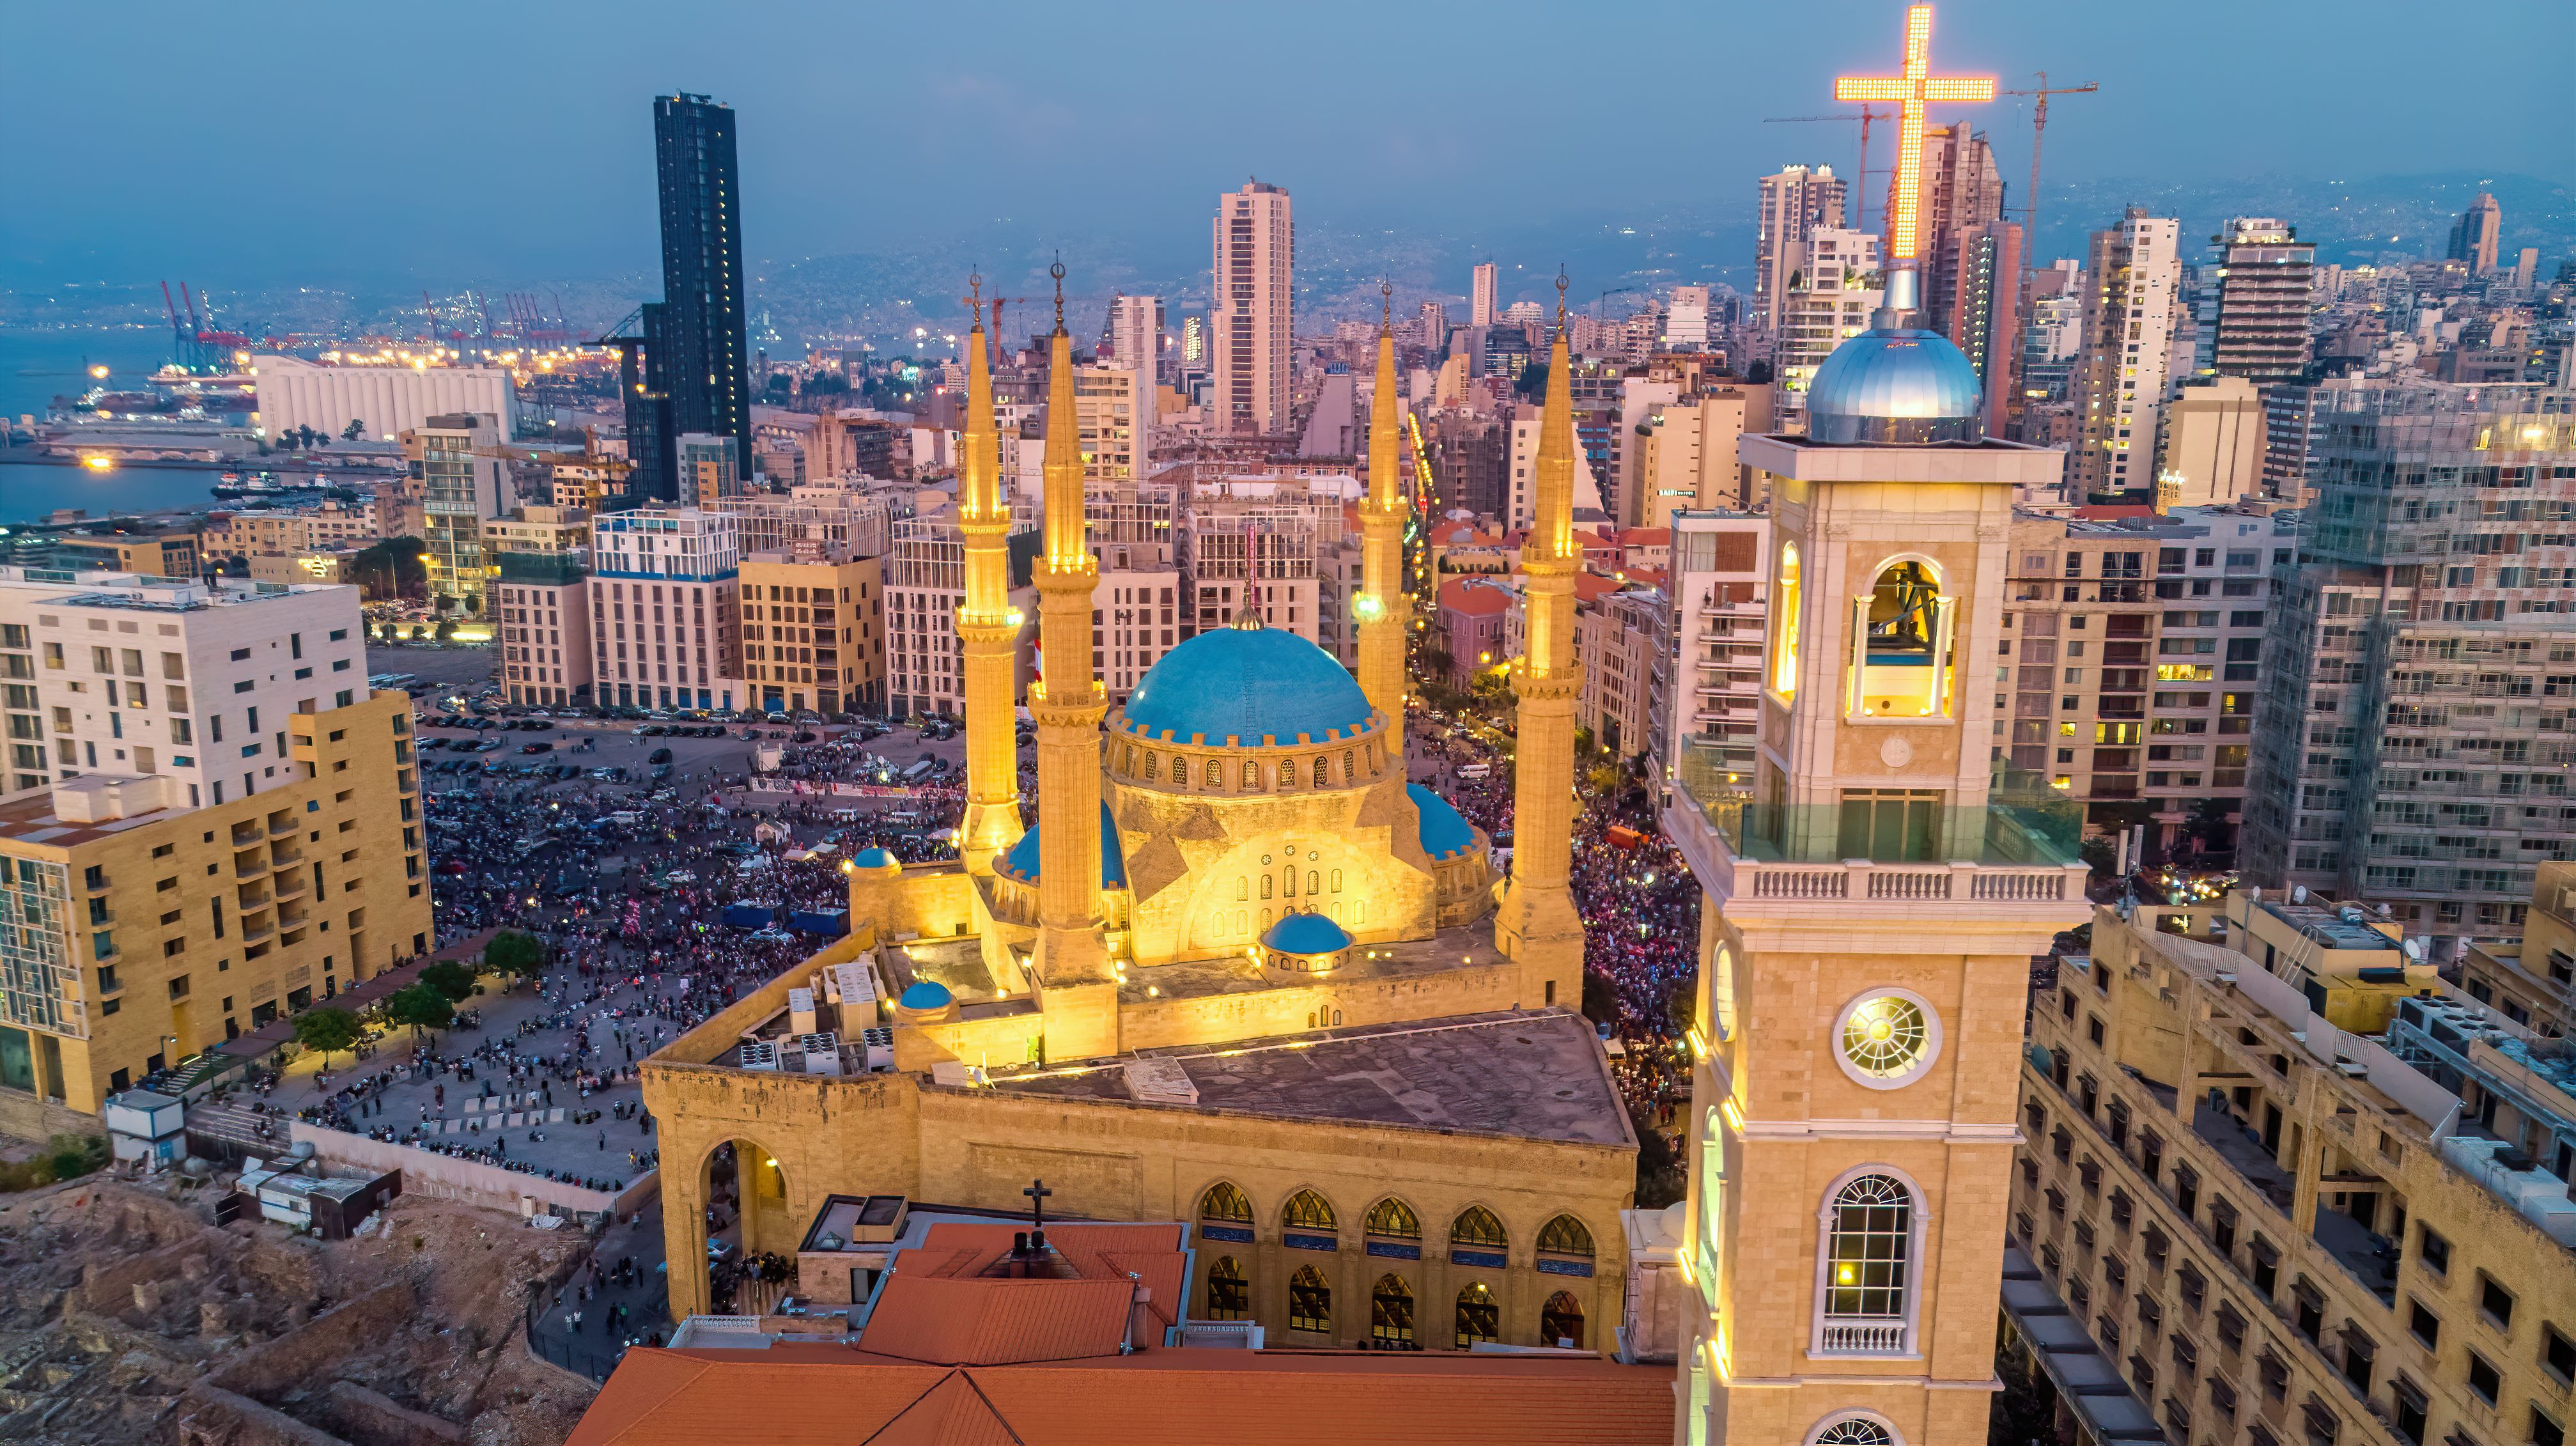 An aerial view of Beirut's downtown cityscape with the Mohammad al amin mosque in the foreground